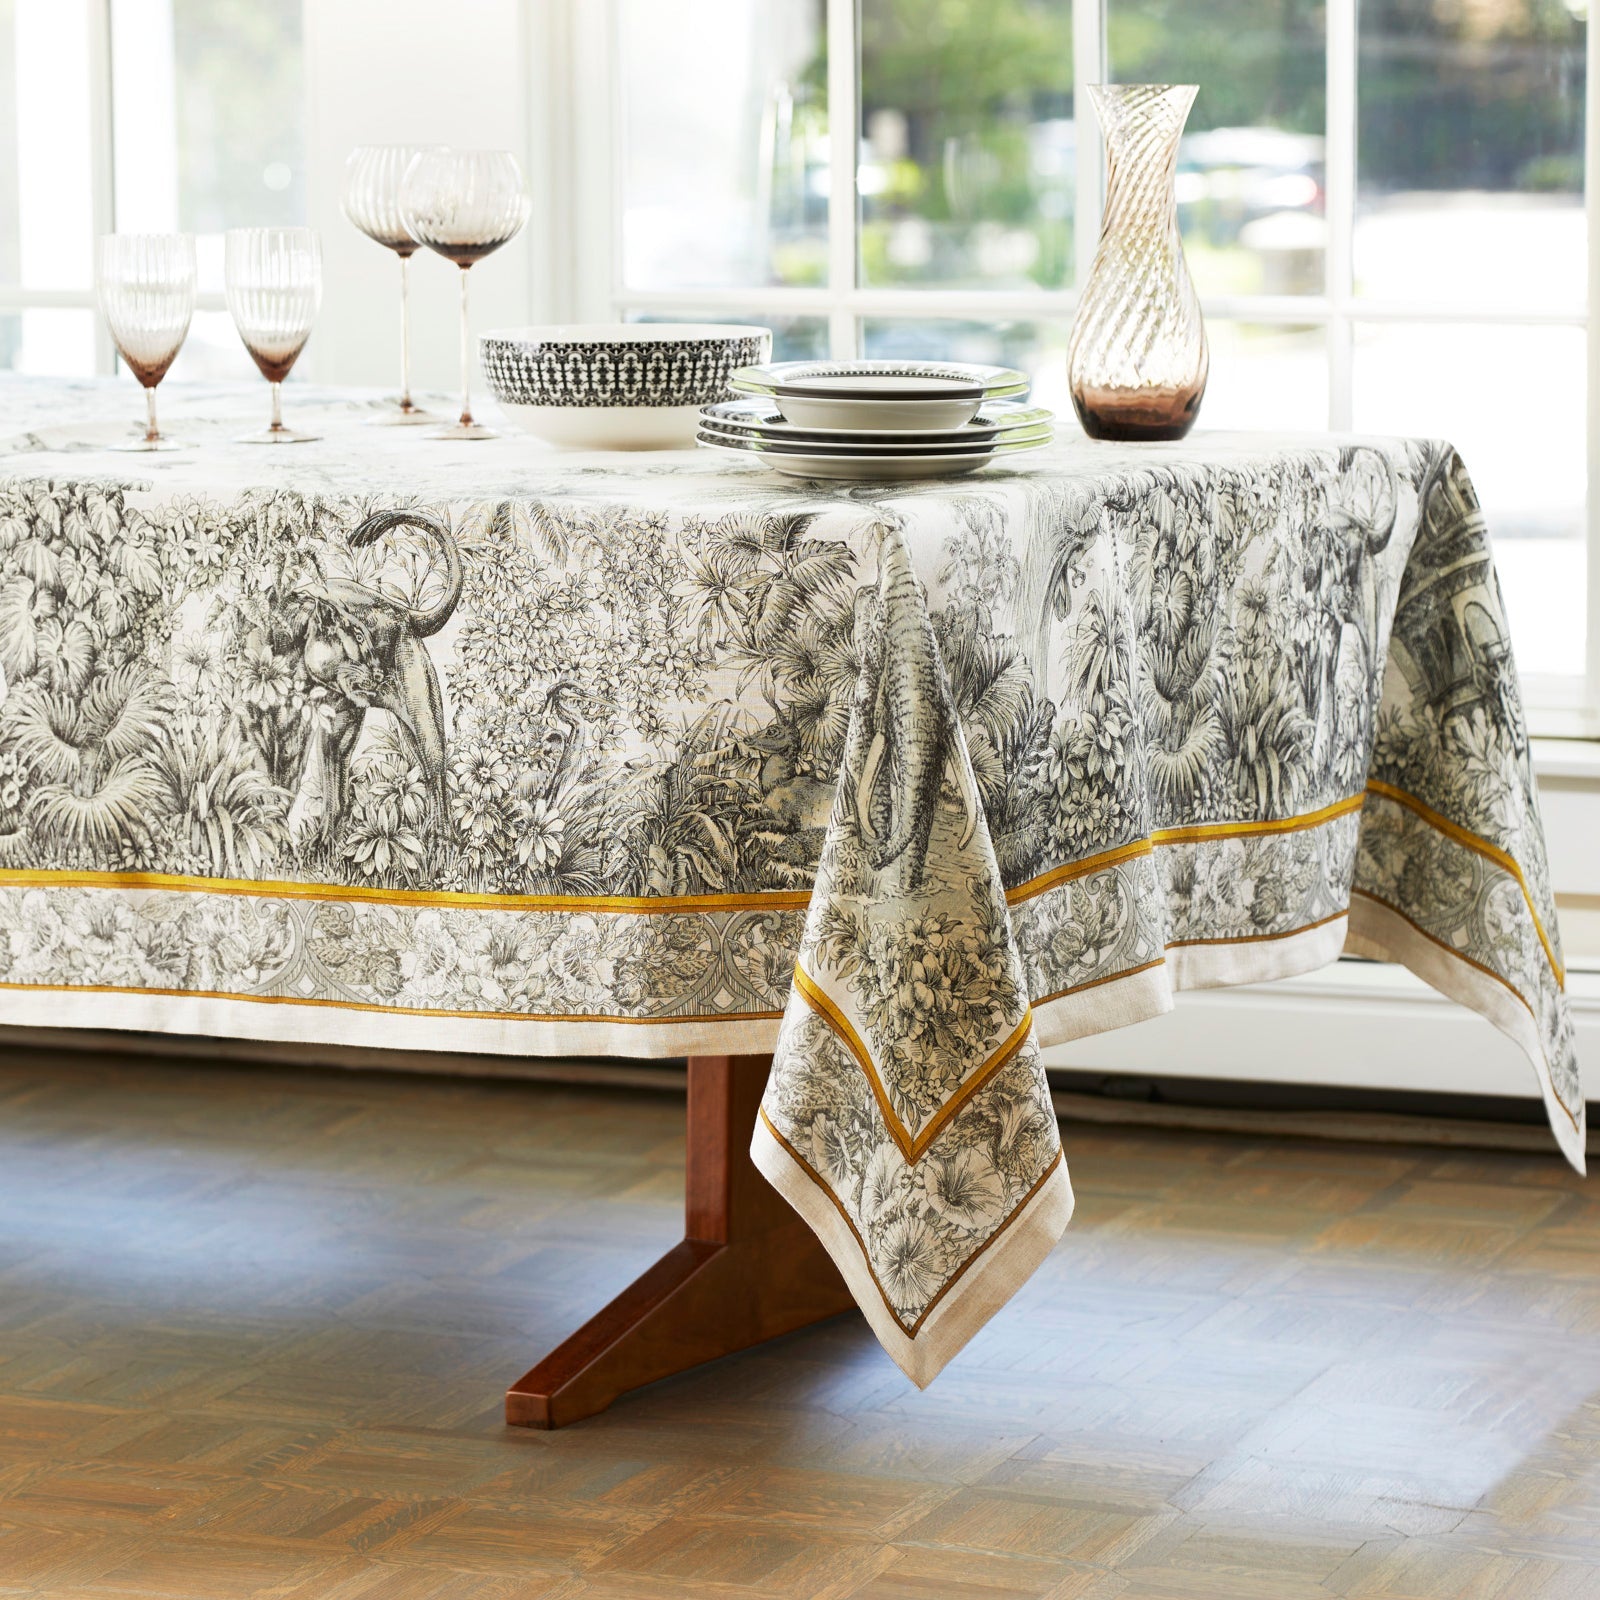 Morocco Tablecloth Graphic Print in glack and white engraving with gold. Printed on Italian linen from Caskata